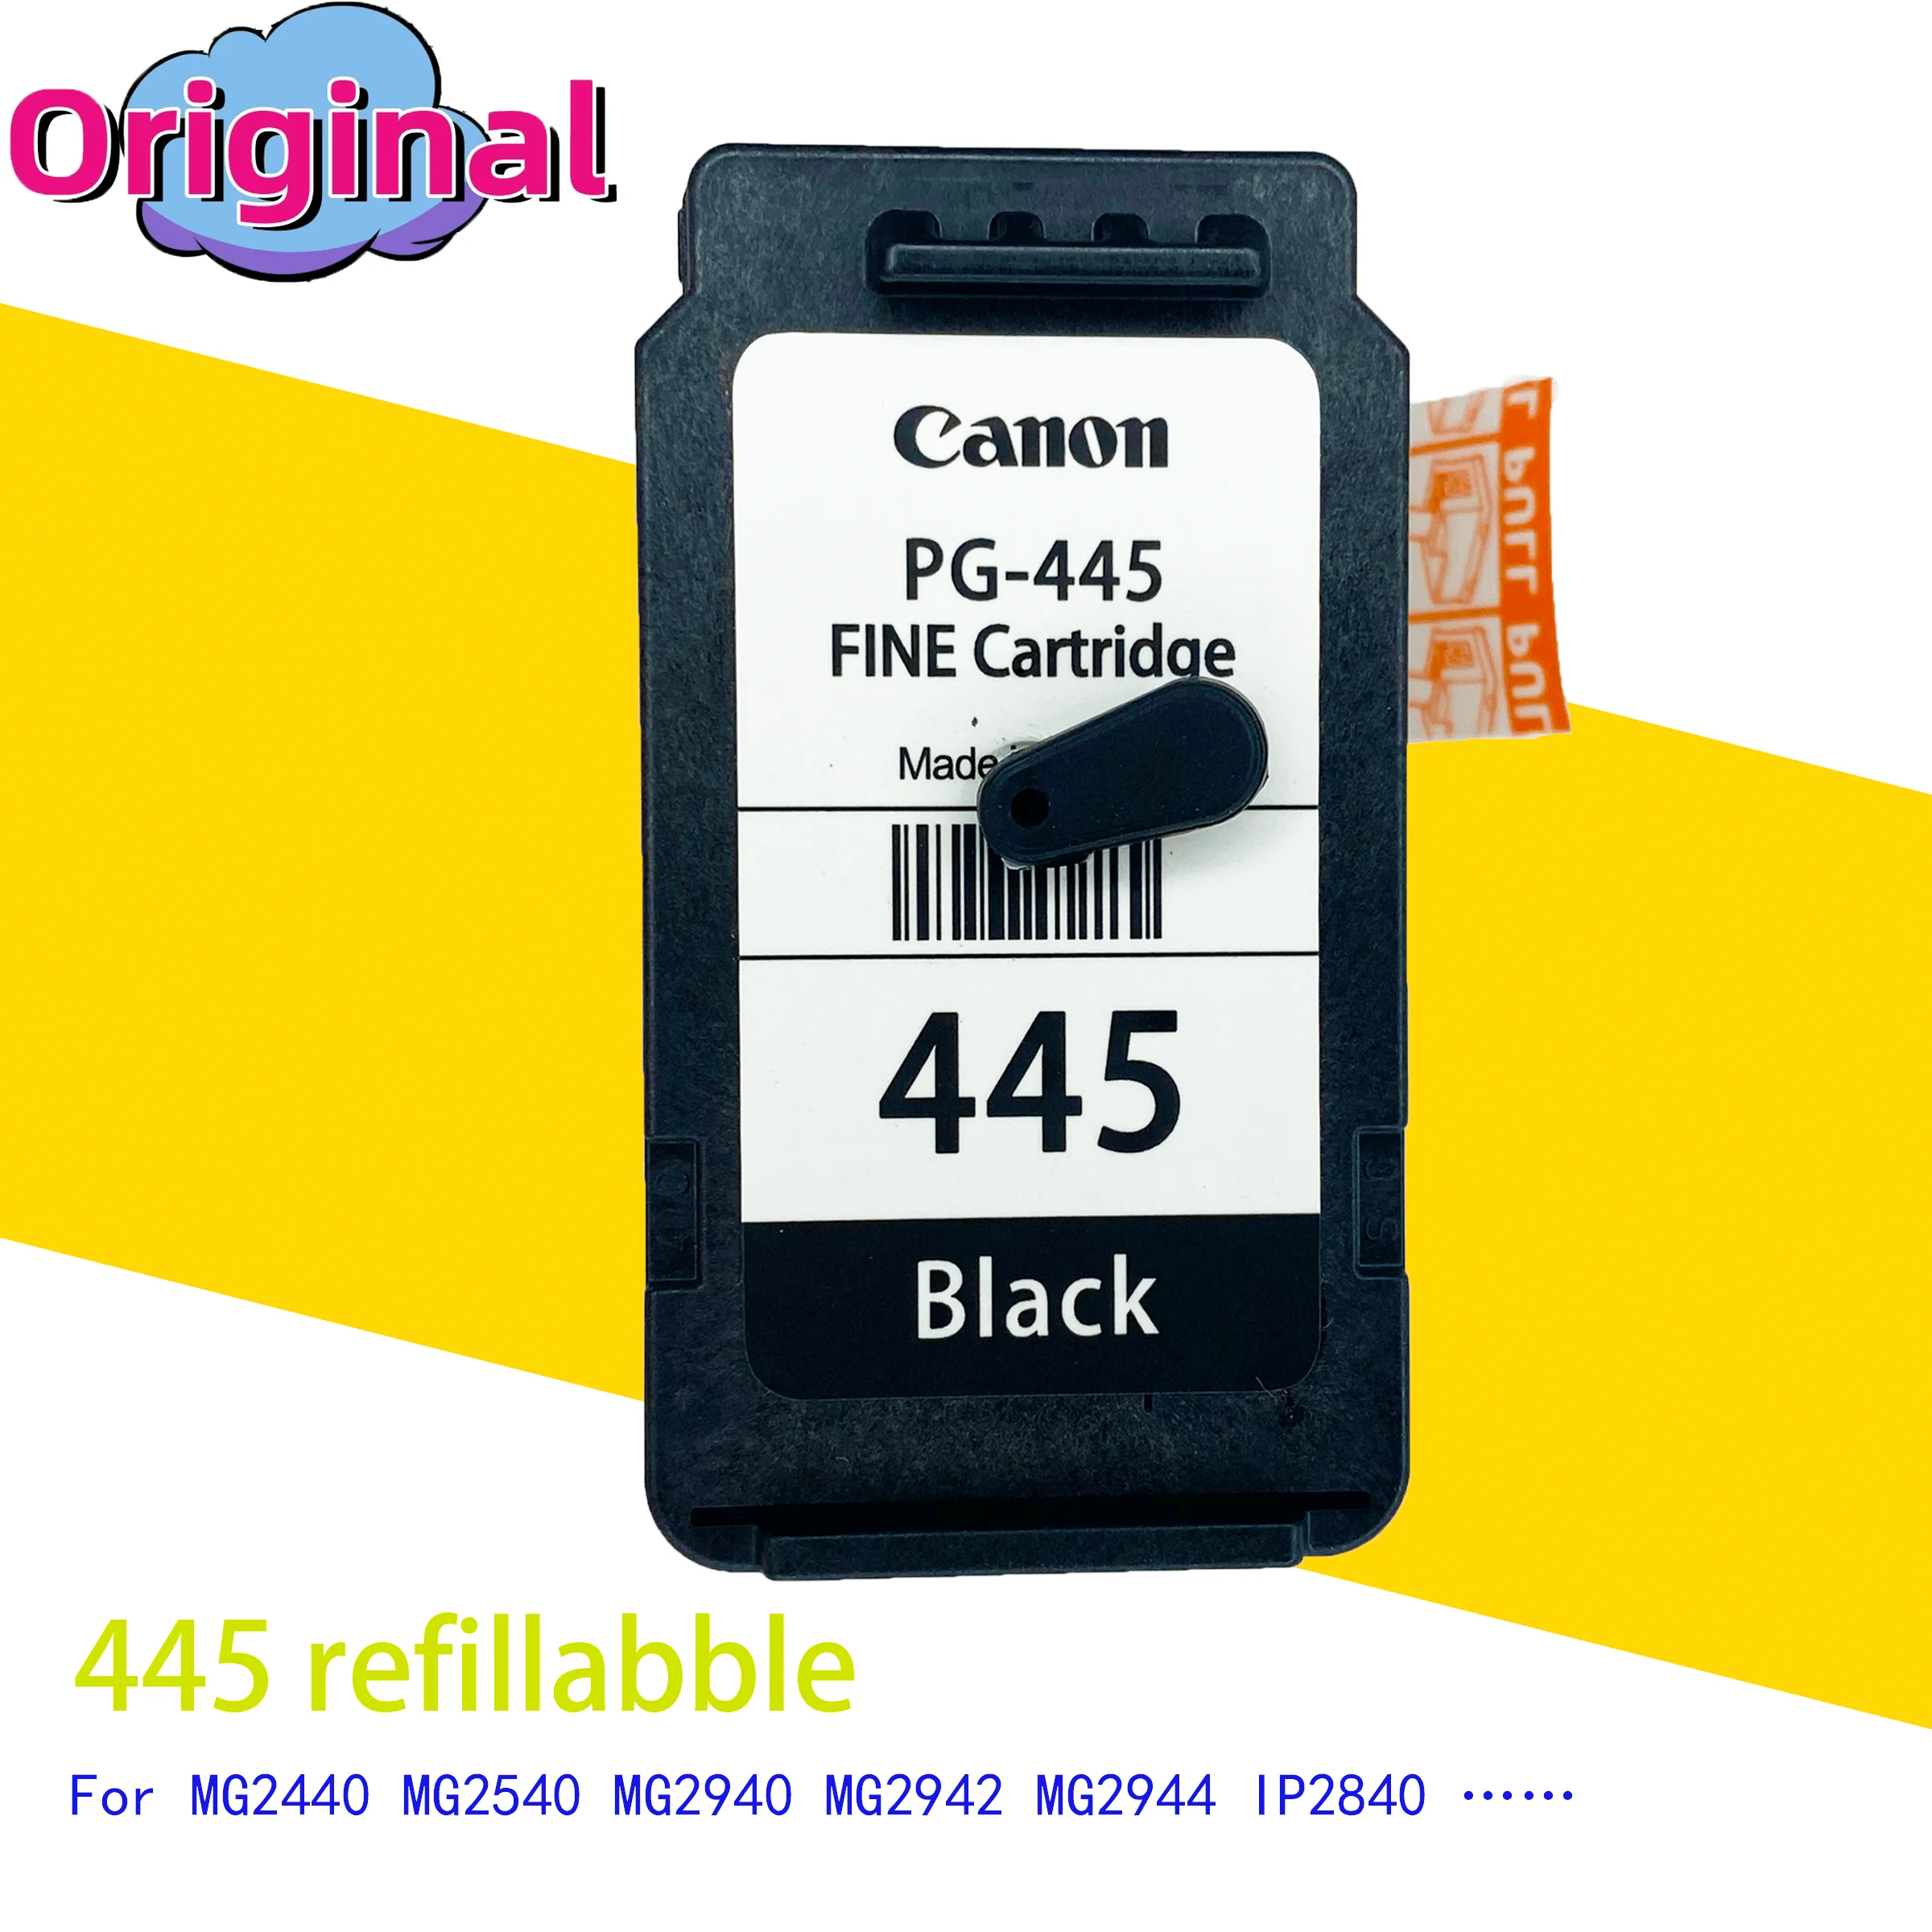 Original Ink Cartridge  PG 445 CL446 Compatible for Canon PIXMA MX494 MG2440 MG2940 MG2540 MG2540S IP2840